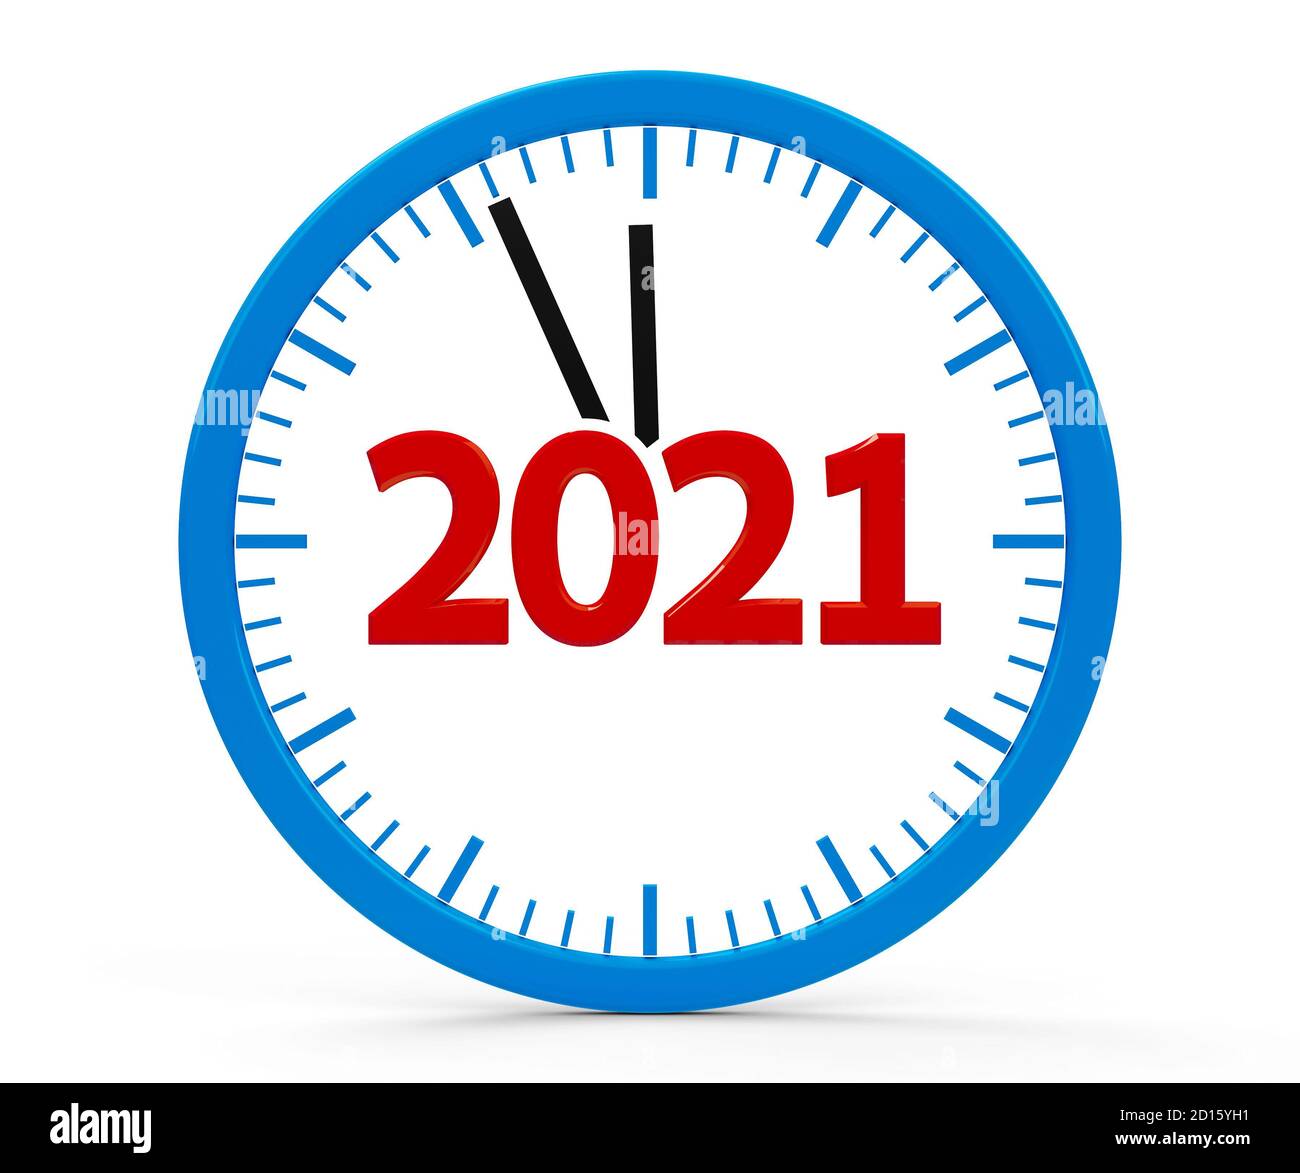 Modern isolated clock on white background represents new year 2021, three-dimensional rendering, 3D illustration Stock Photo